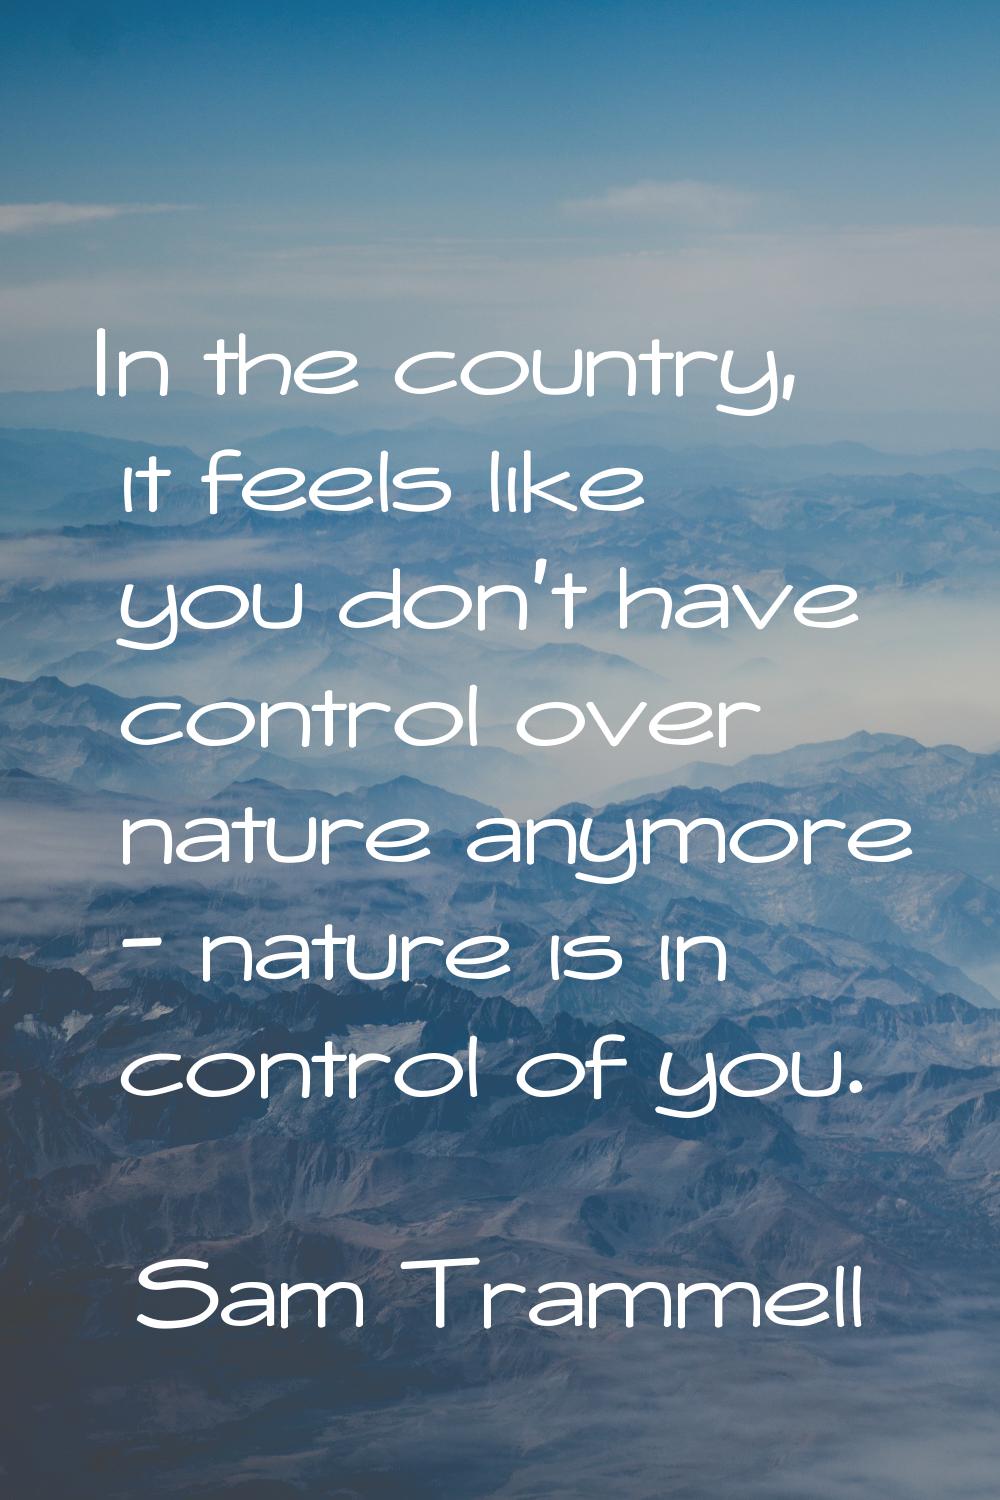 In the country, it feels like you don't have control over nature anymore - nature is in control of 